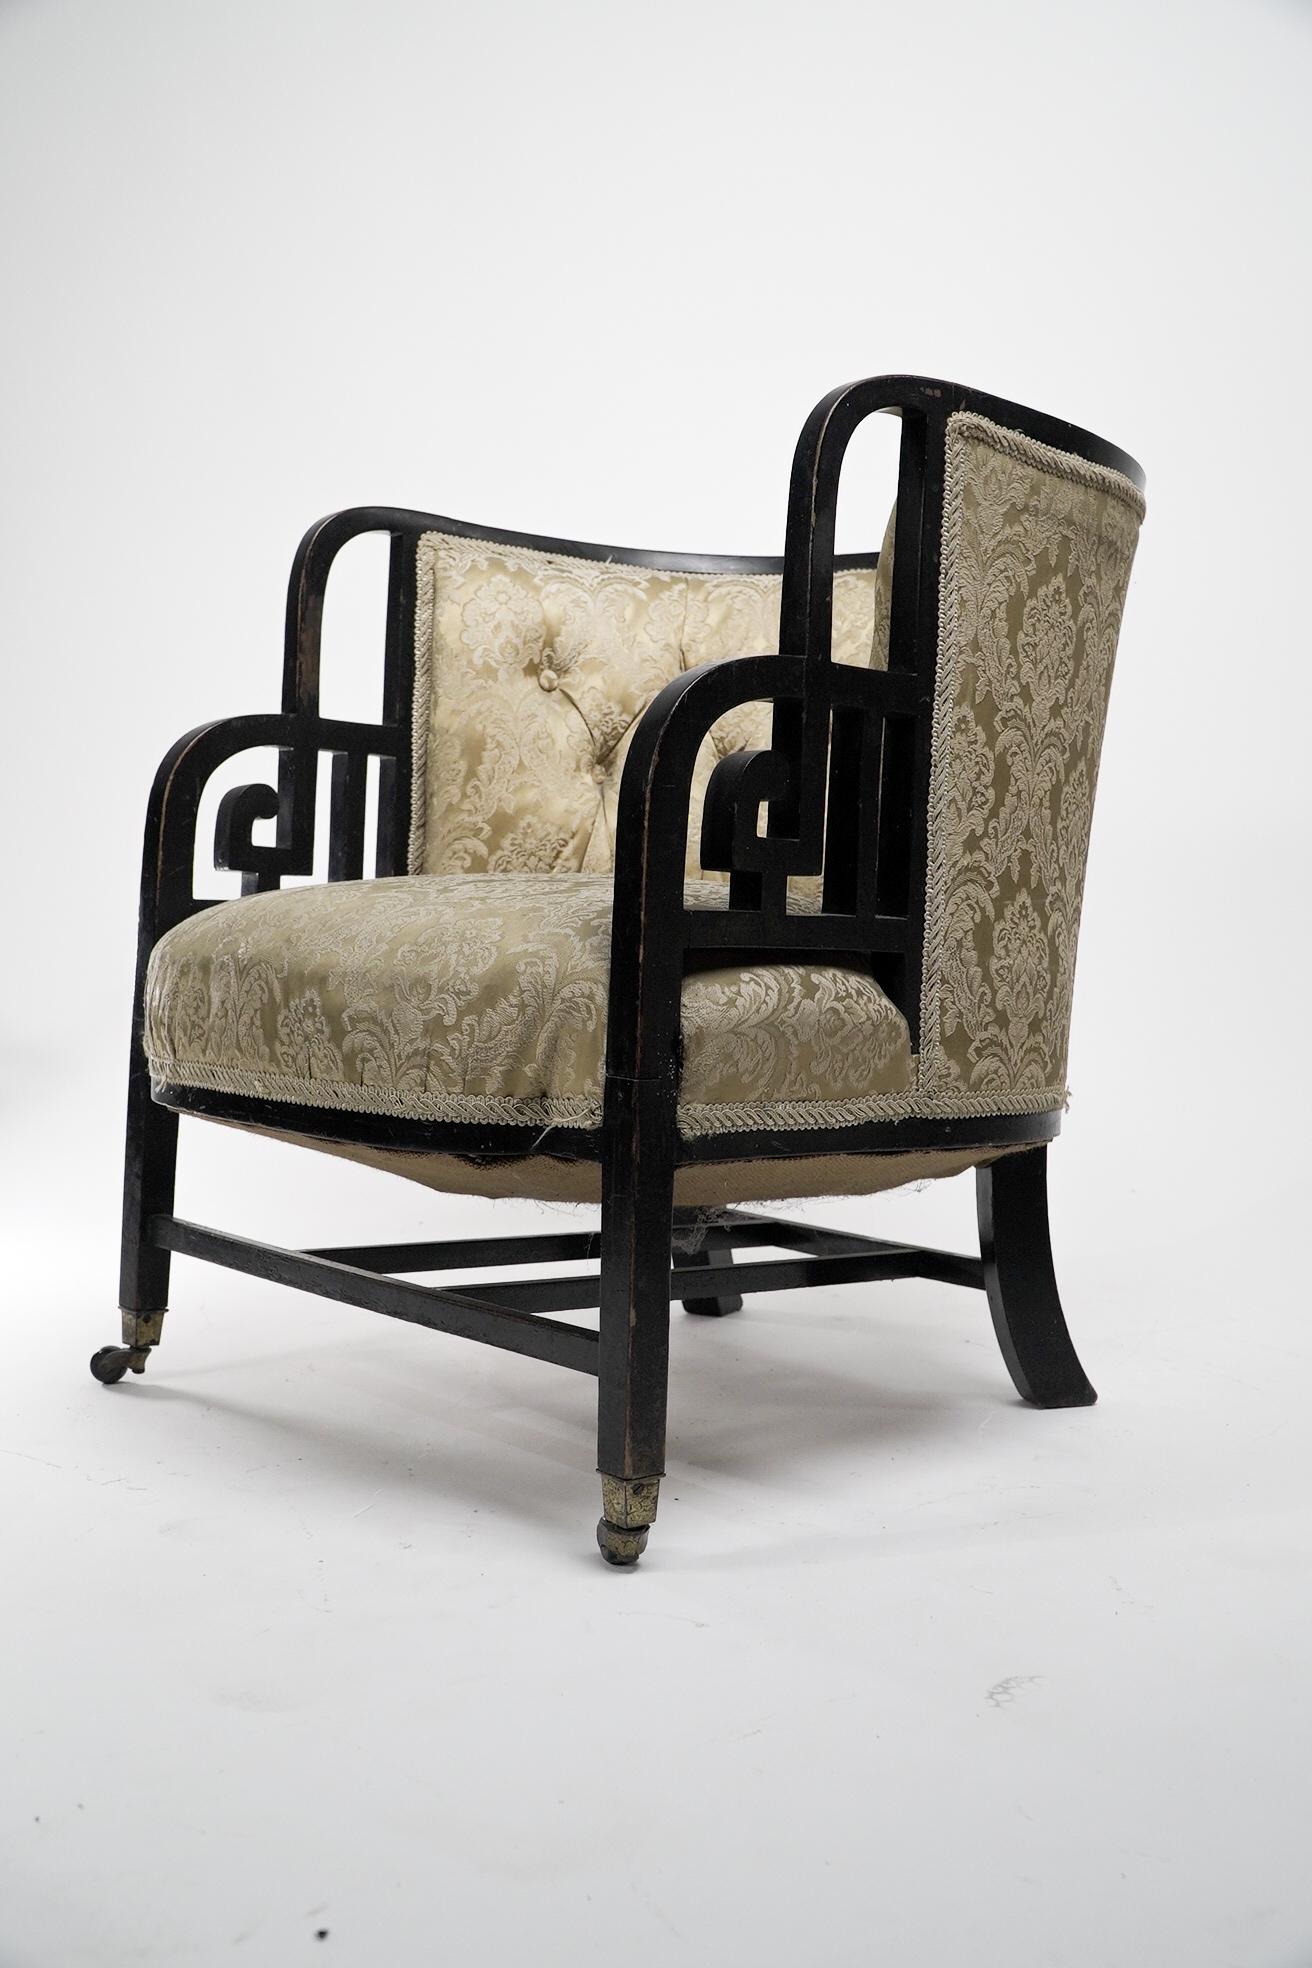 An Anglo-Japanese ebonised walnut lounge chair with stylised Greek key details to the arms and four lower stretchers uniting the legs. Original brass and ceramic castors.